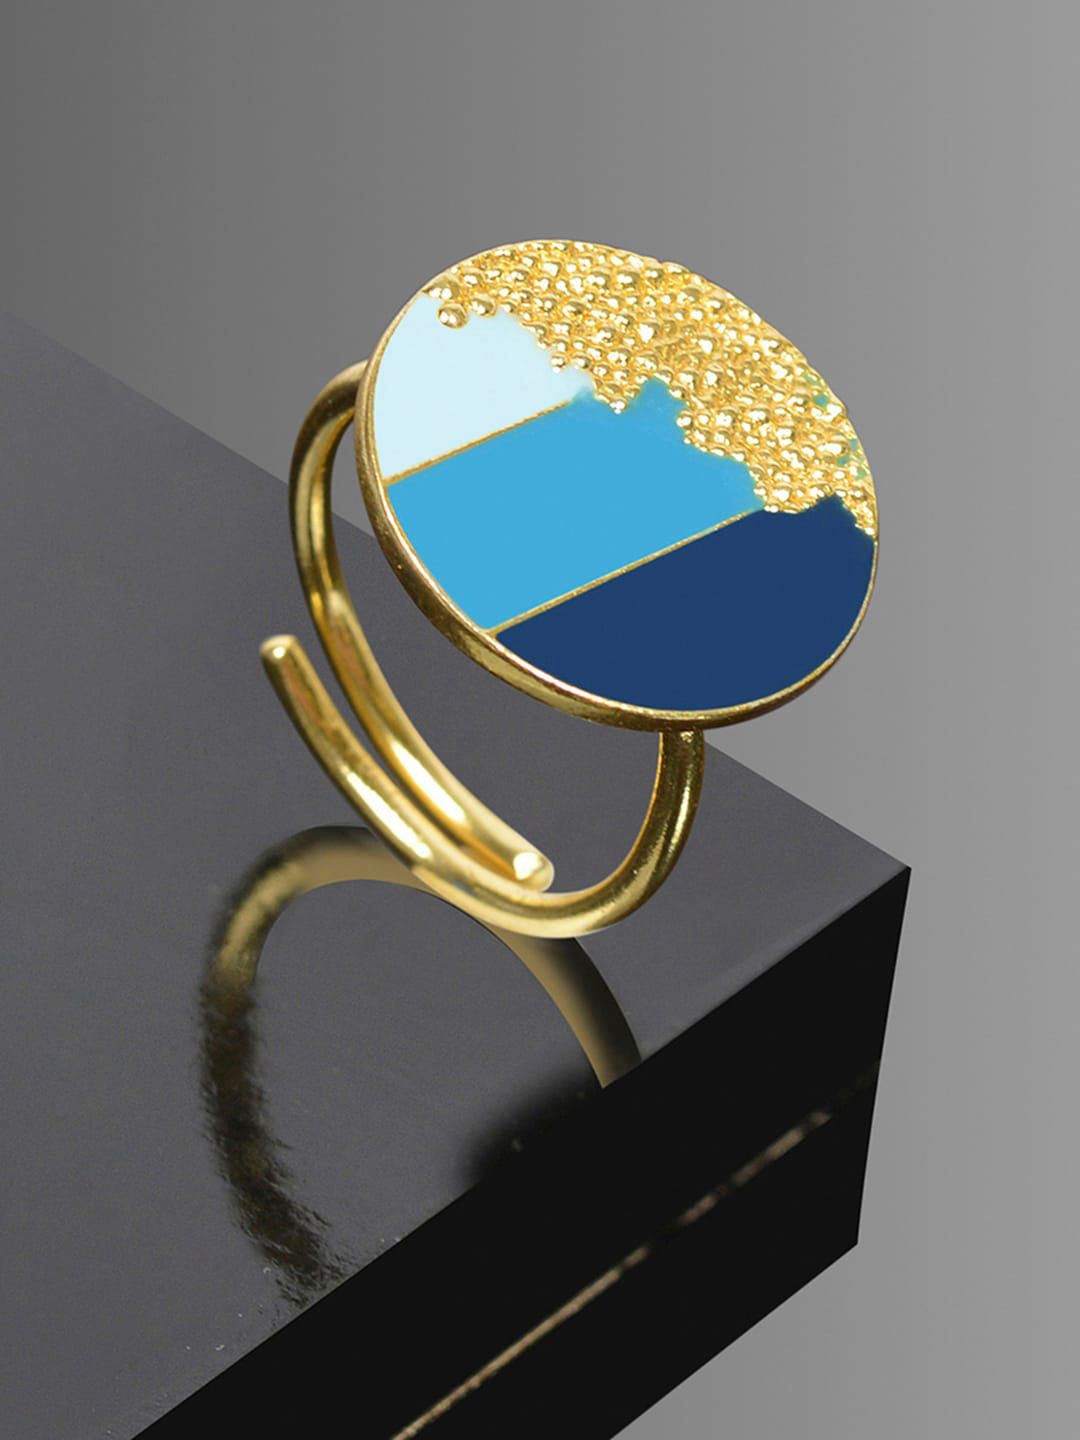 Mikoto by FableStreet Gold-Plated Blue Enamelled Adjustable Finger Ring Price in India